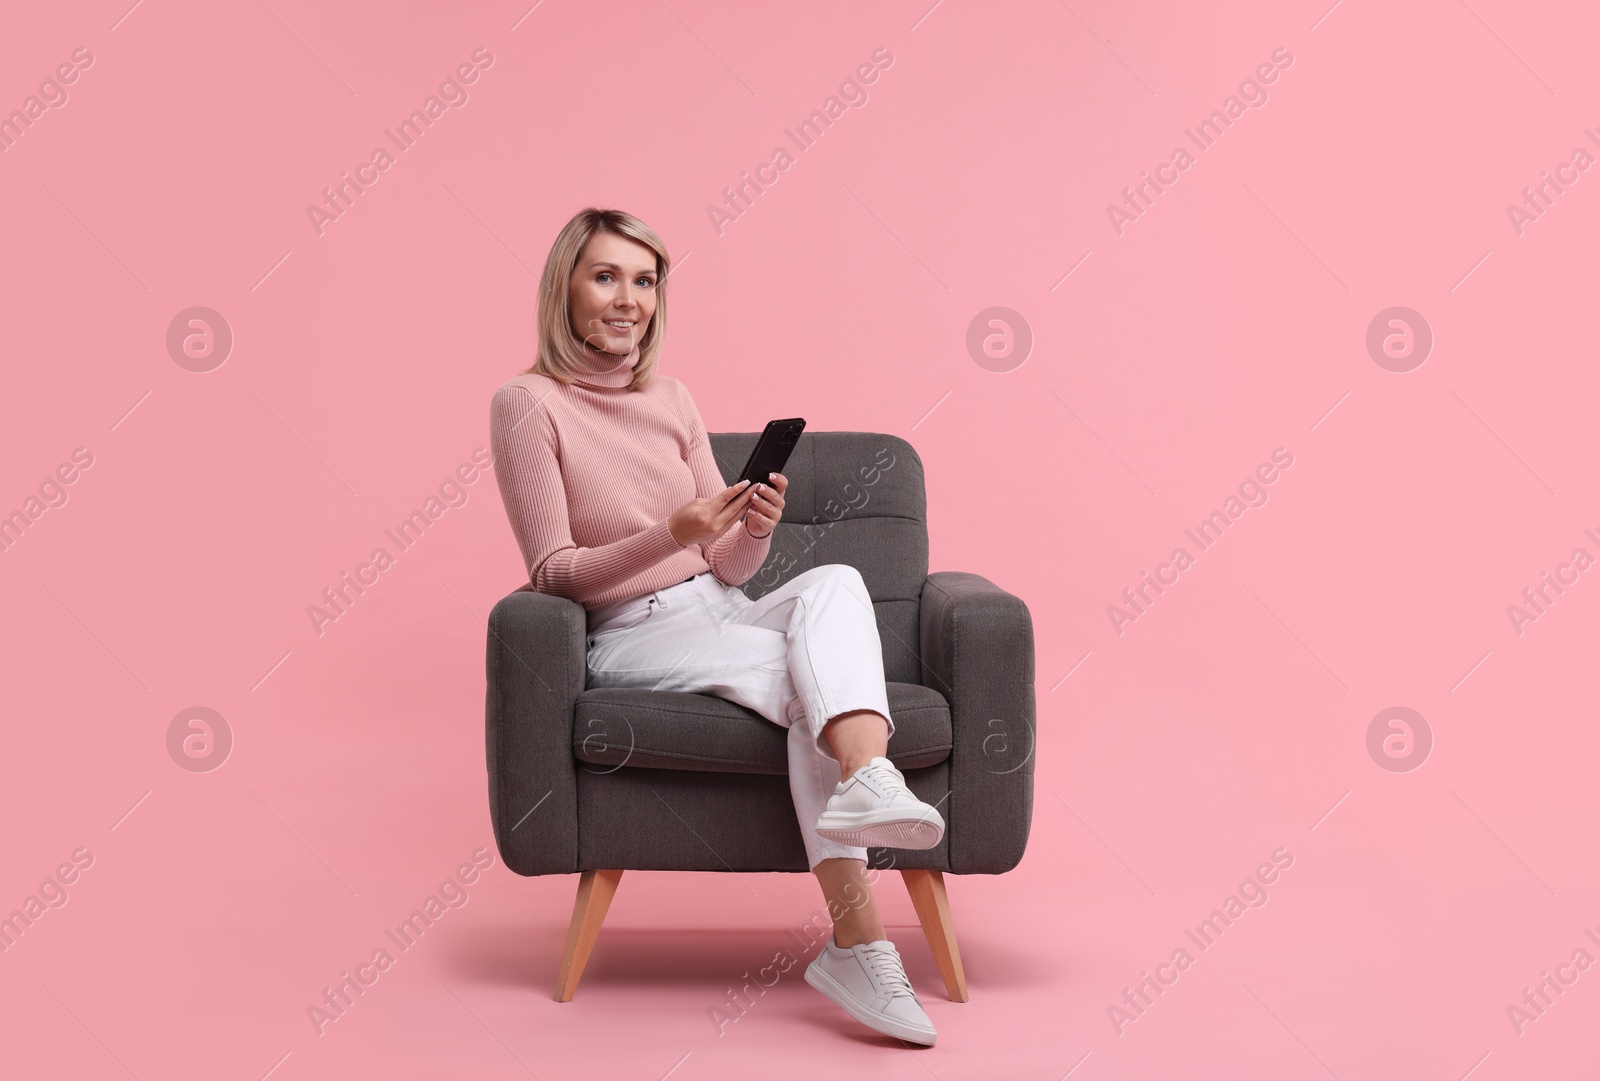 Photo of Happy woman with phone on armchair against pink background